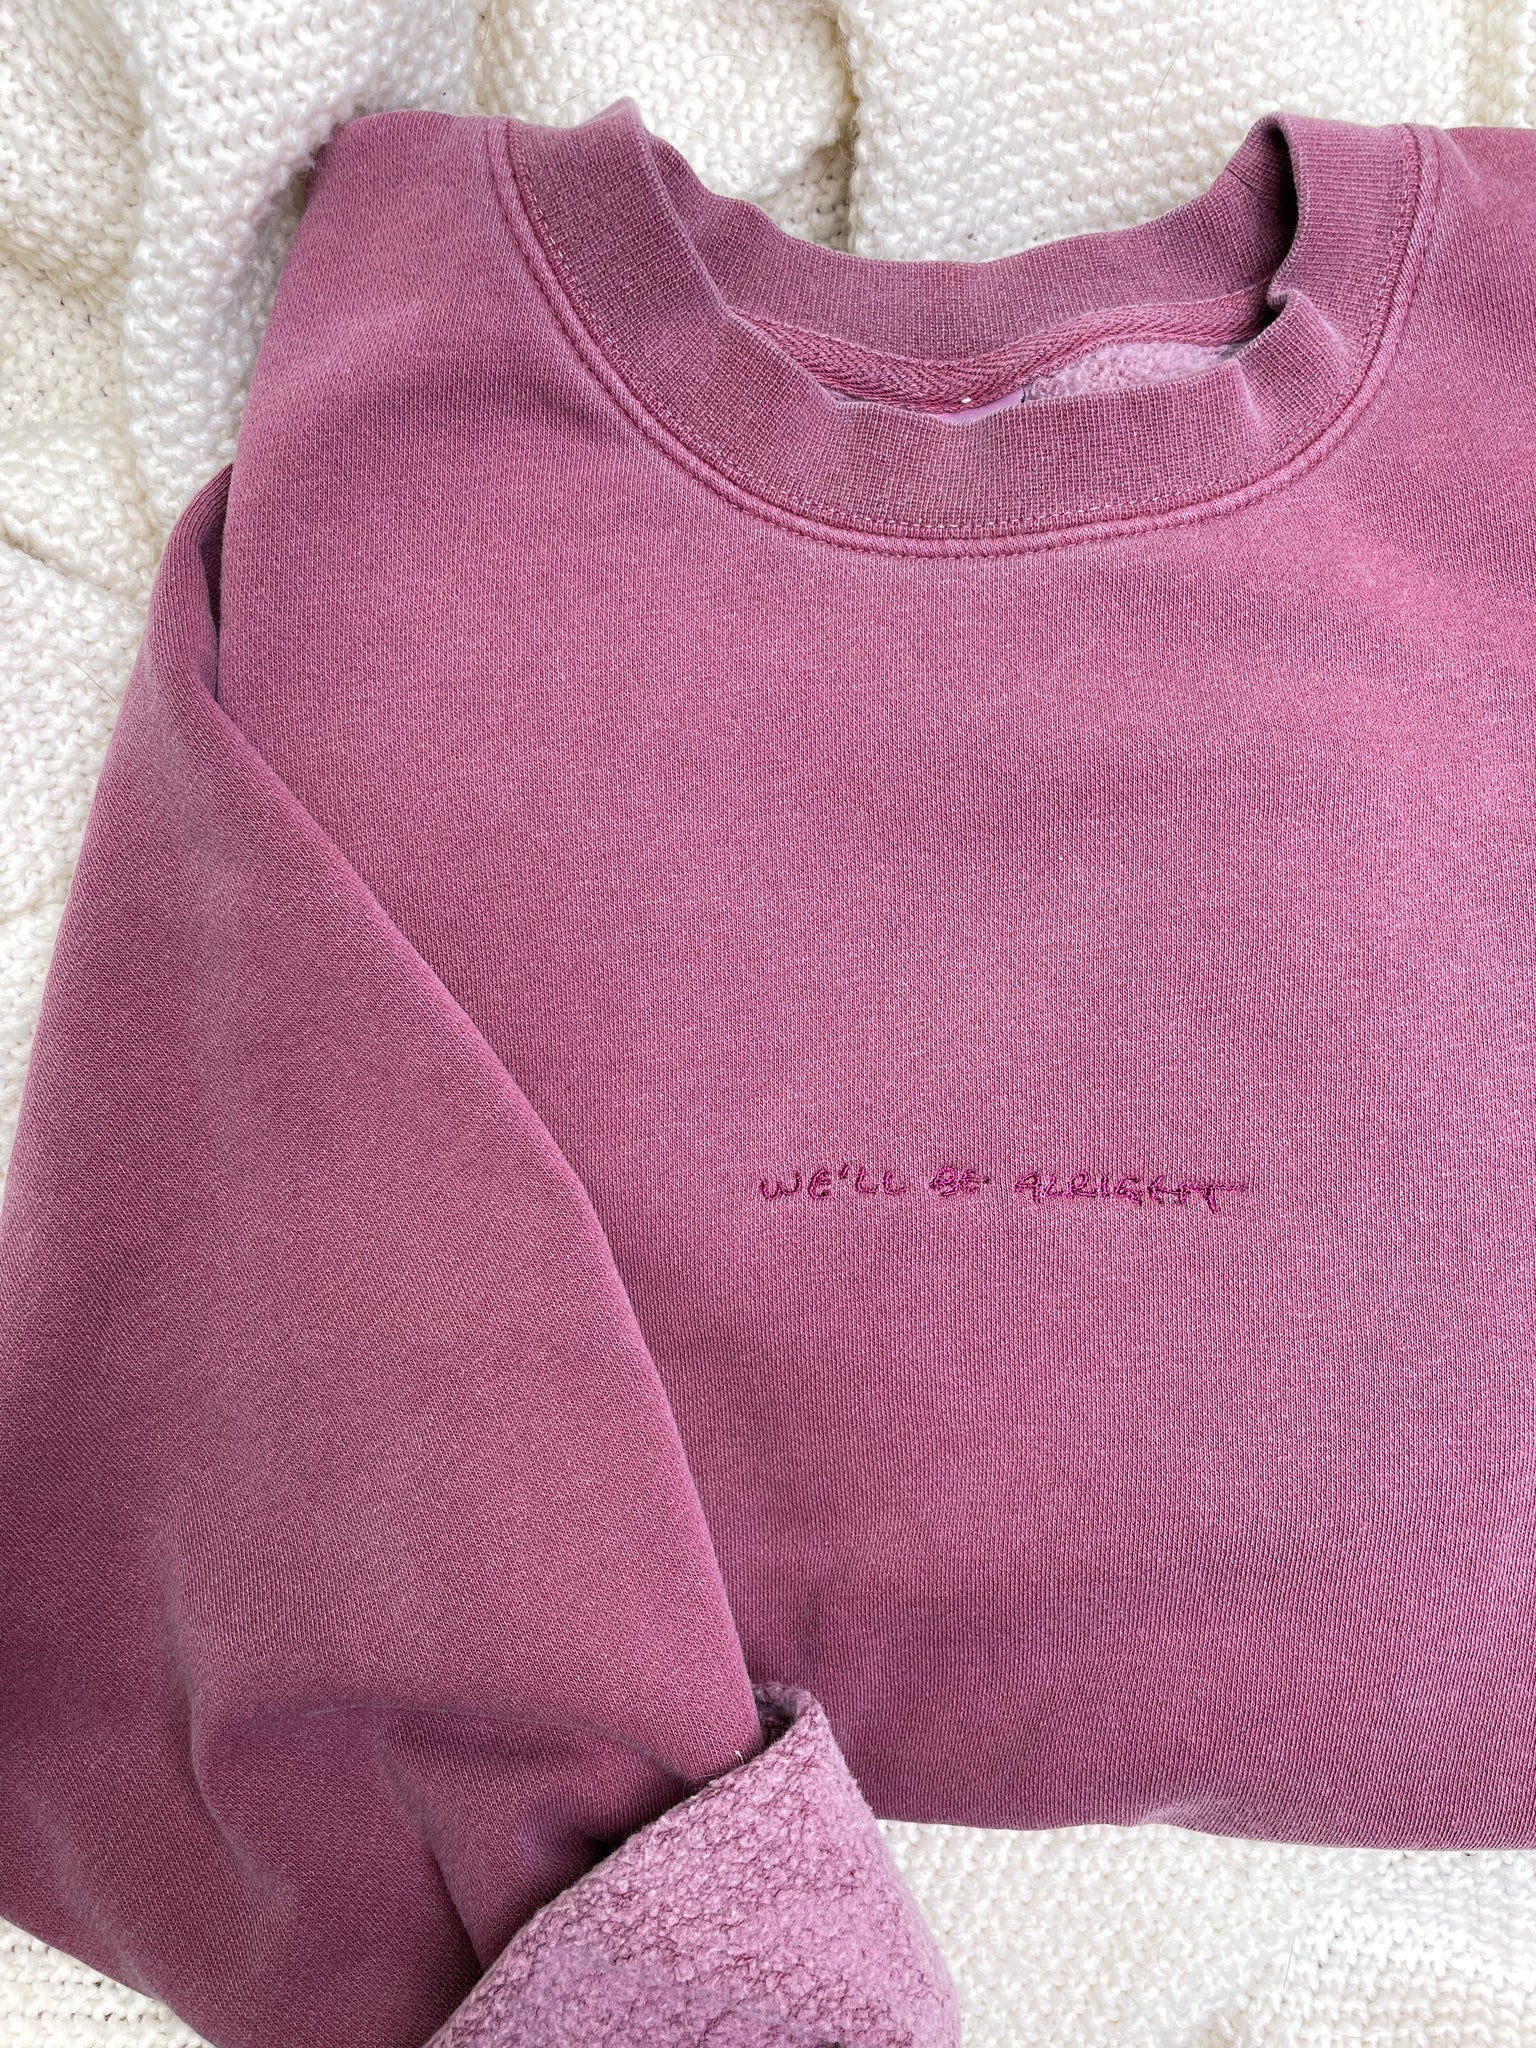 We'll Be Alright Embroidered Sweatshirt